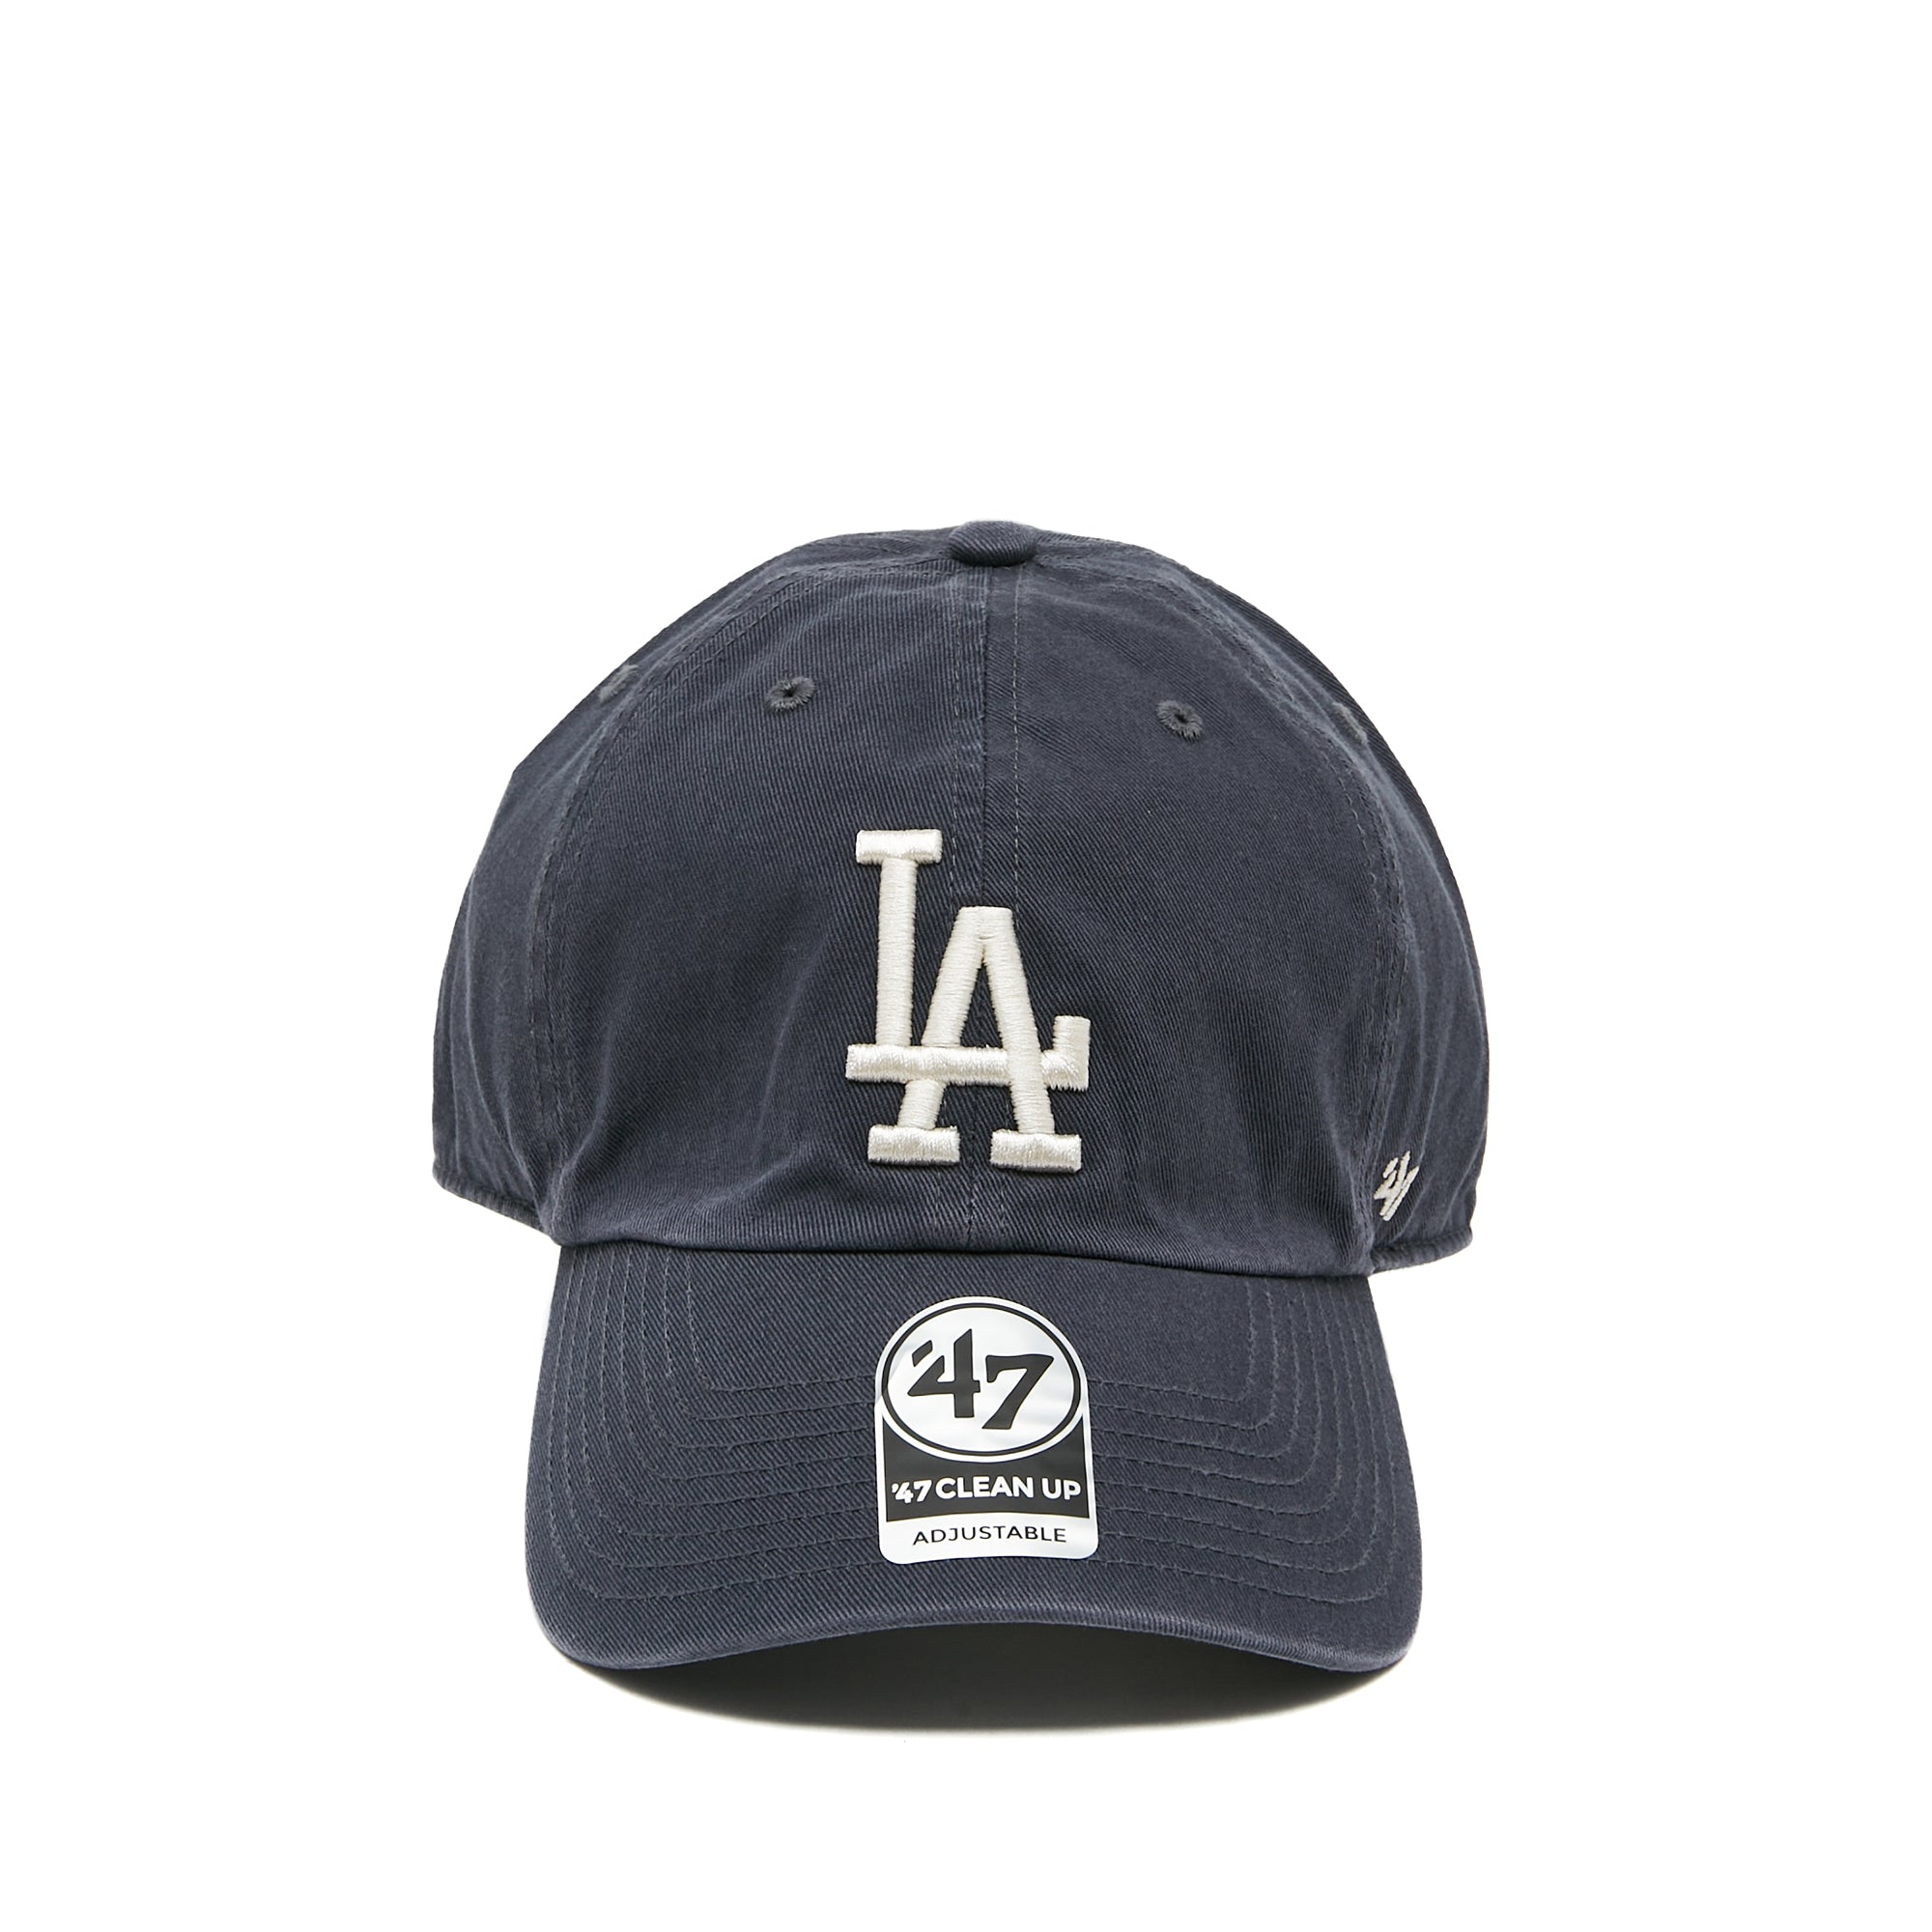 MLB Los Angeles Dodgers 47 Clean Up Cap Vintage Navy One Size